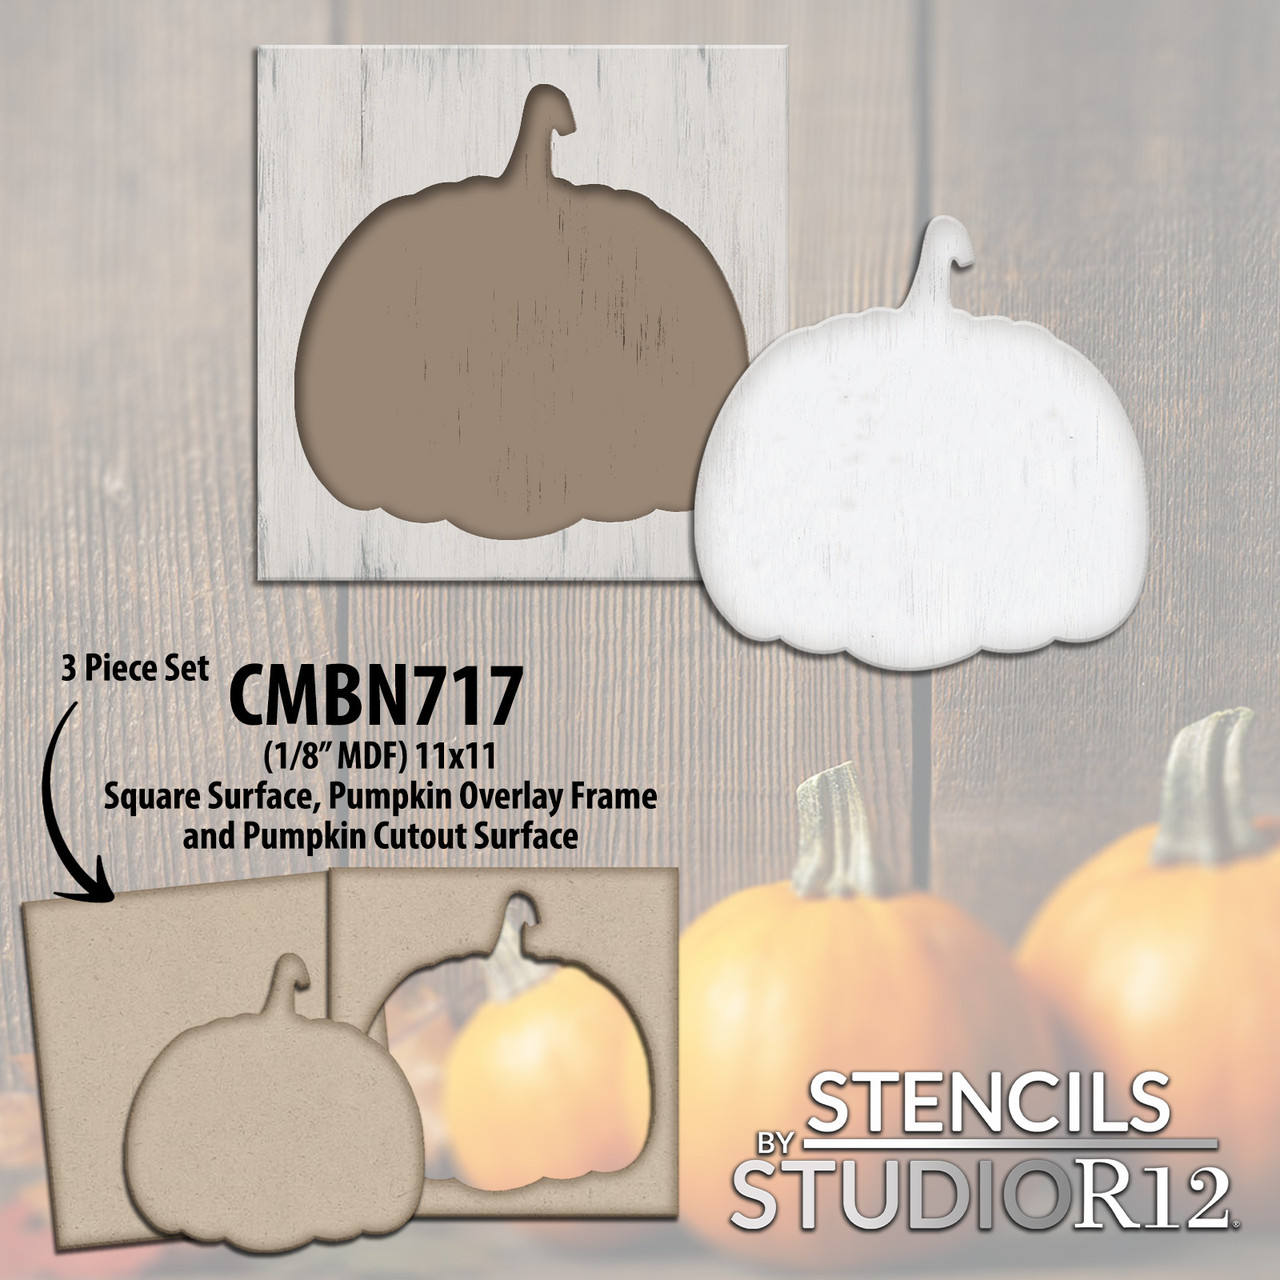 Pumpkin Frame, Cutout & Square Surface Set - 1/8" MDF - Unfinished Wood Blank for DIY Fall Decor - Ready to Paint Surfaces for Crafting - CMBN717